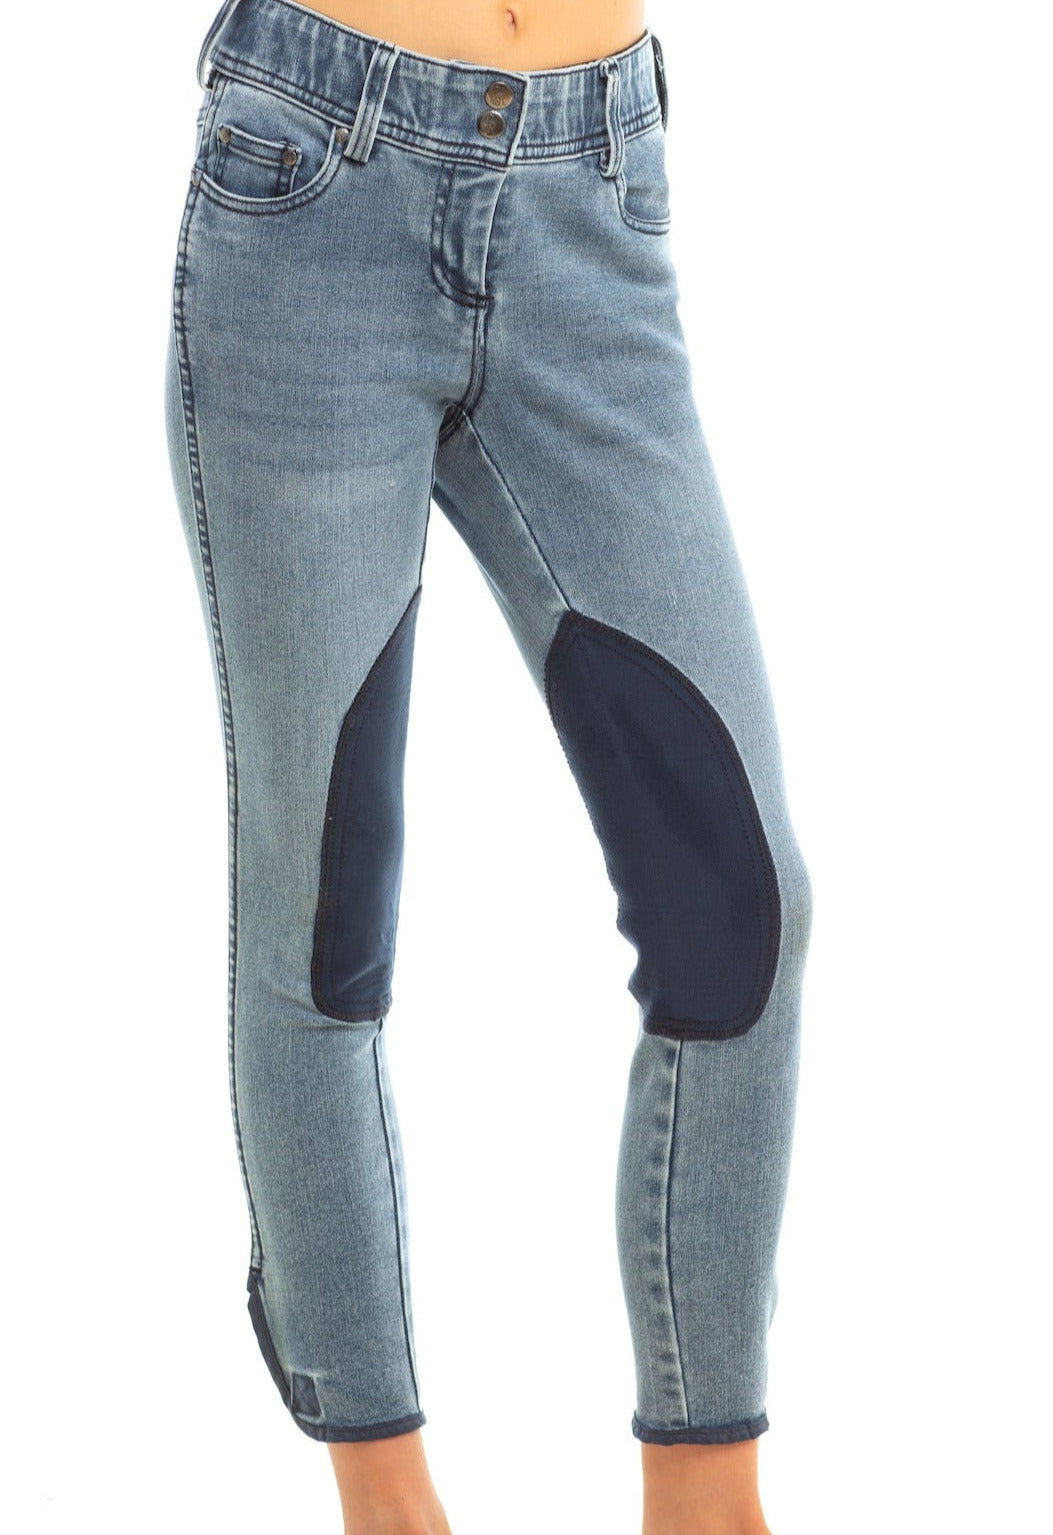 Equestrian Jean Knee Patch – Goode Rider